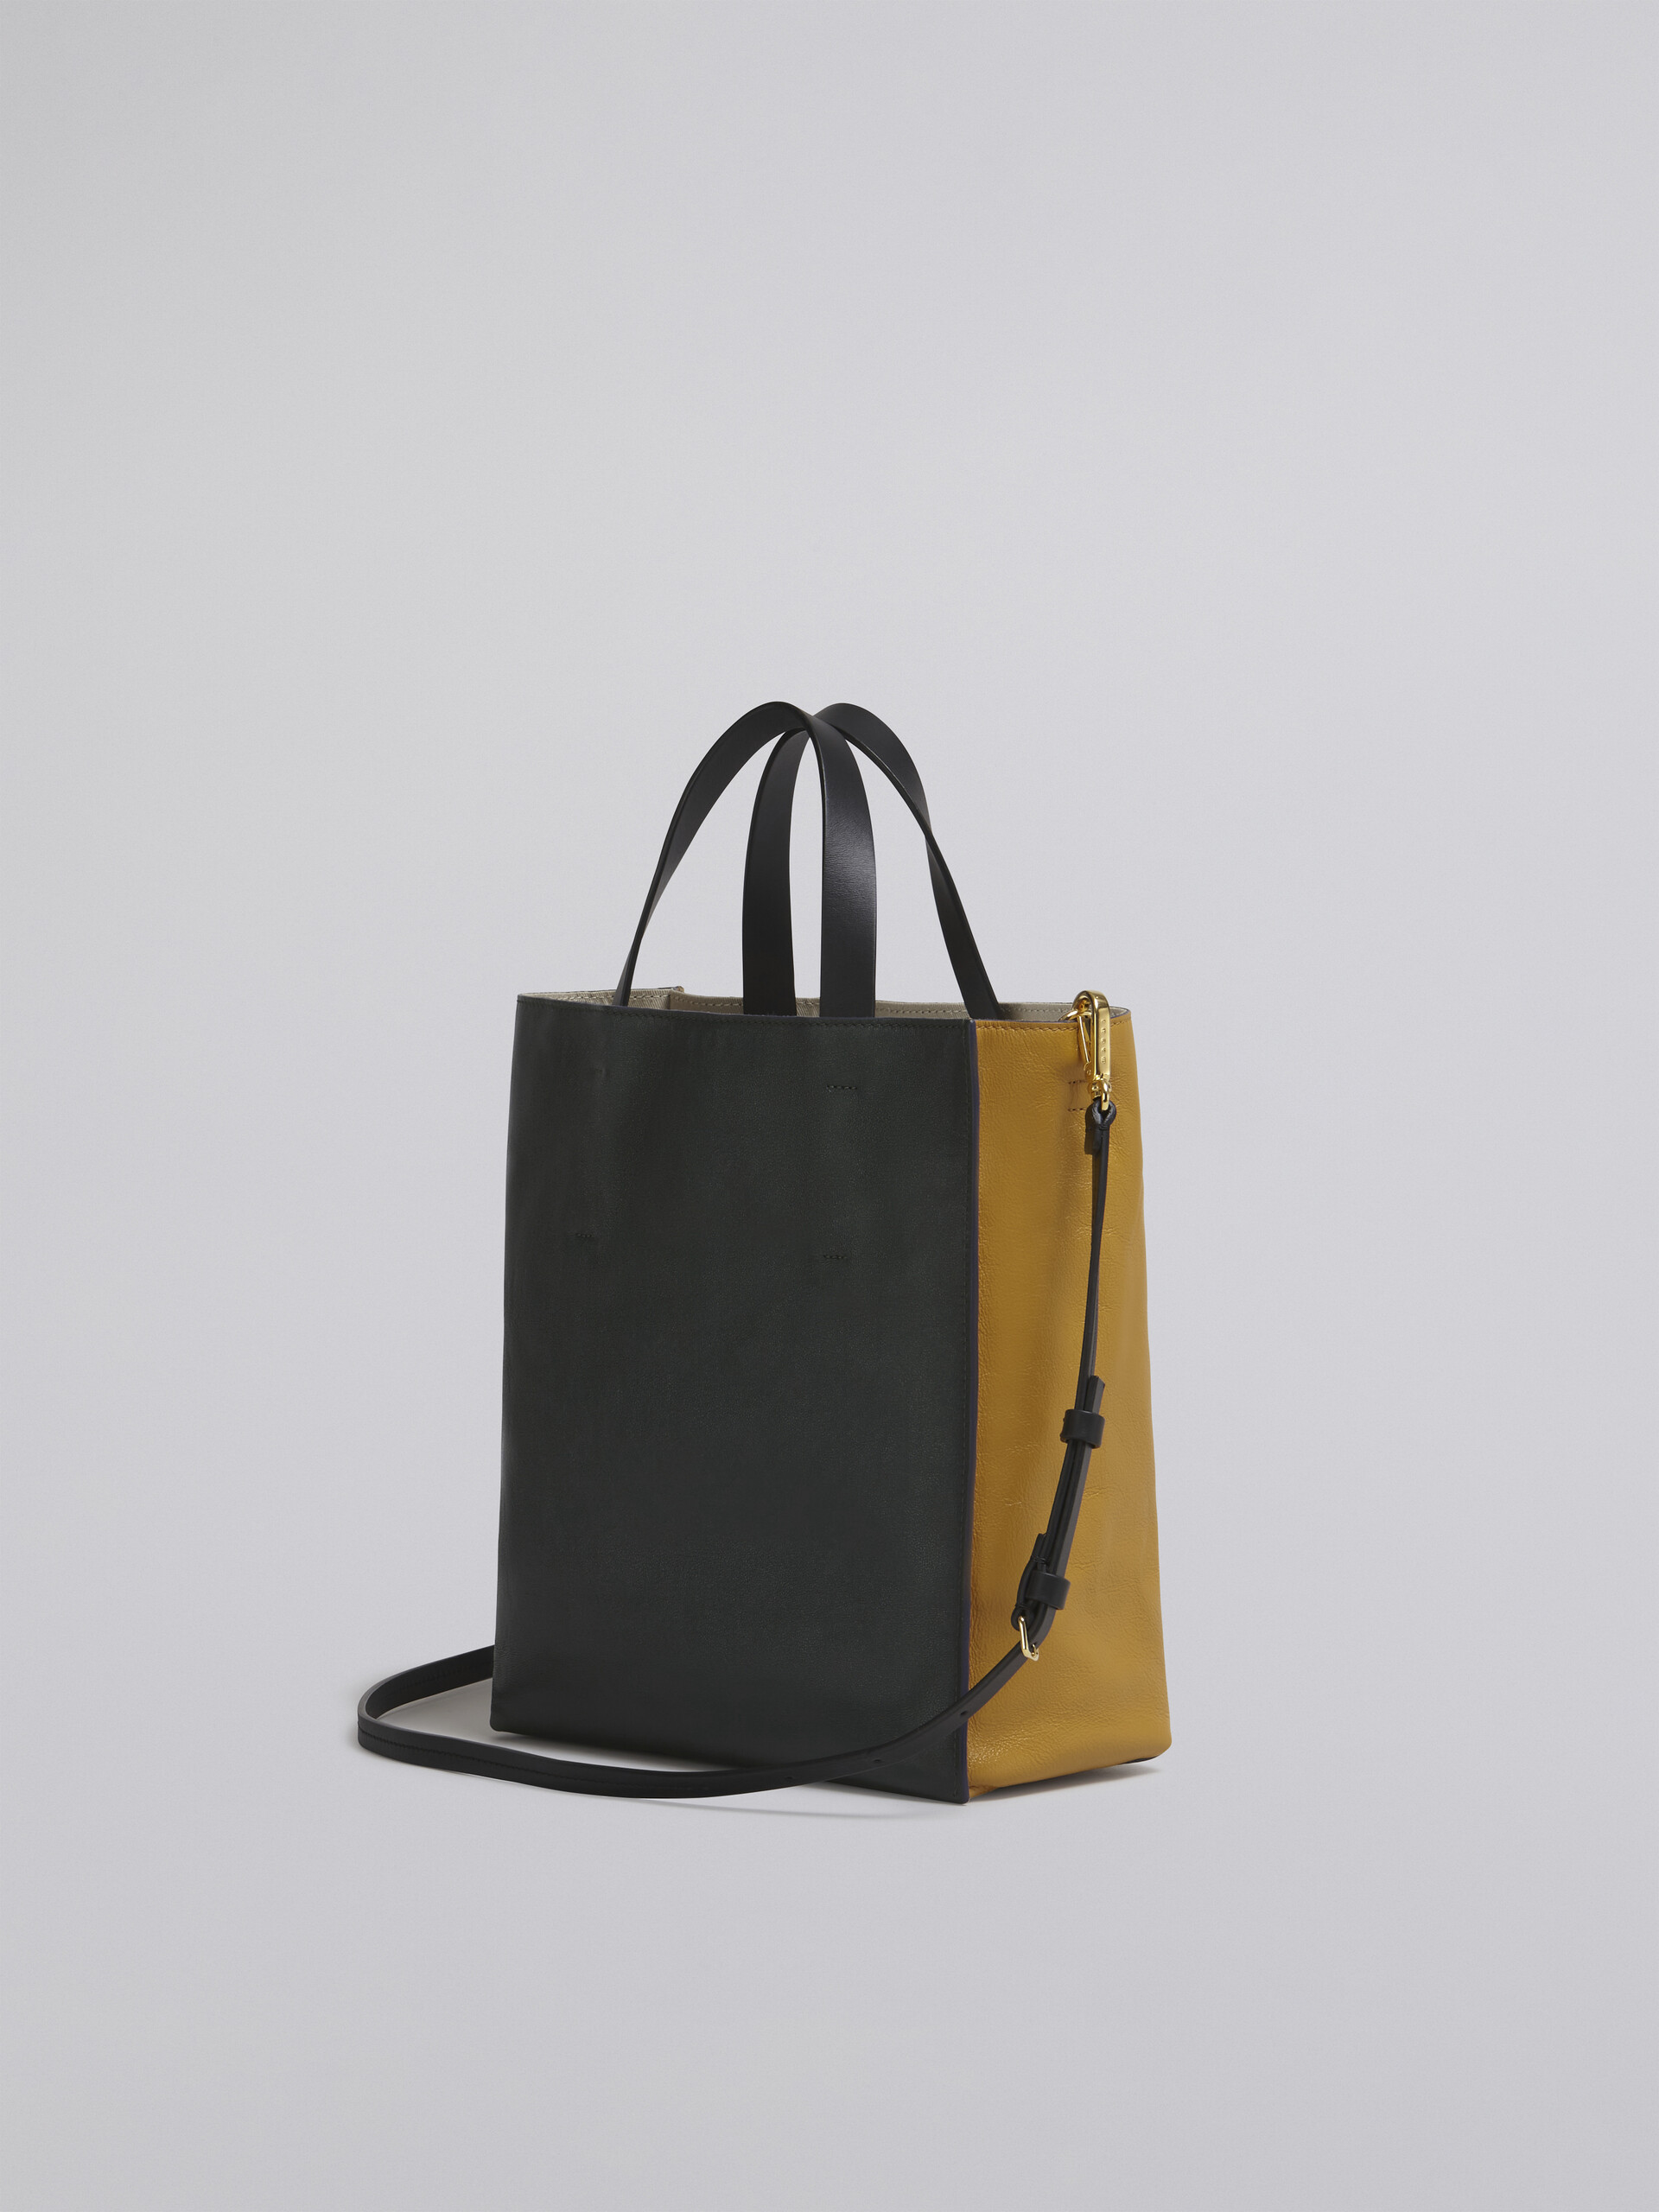 MUSEO SOFT small bag in yellow and green leather | Marni